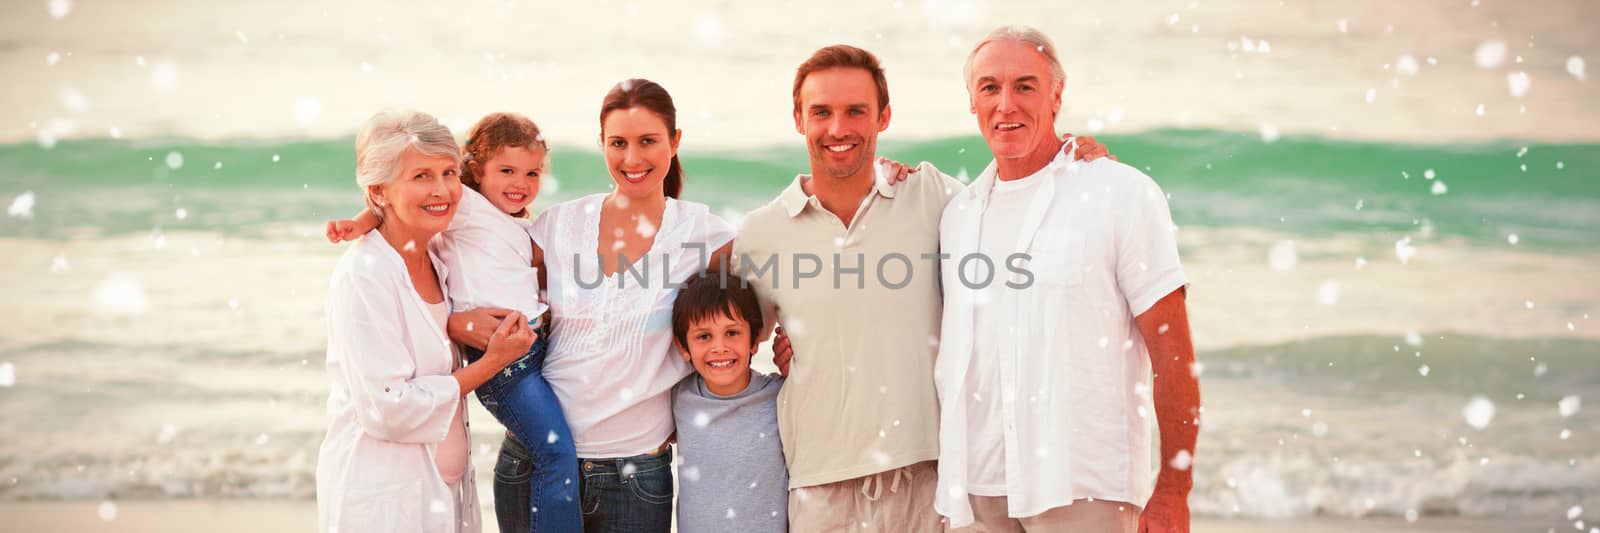 Beautiful family at the beach against snow falling